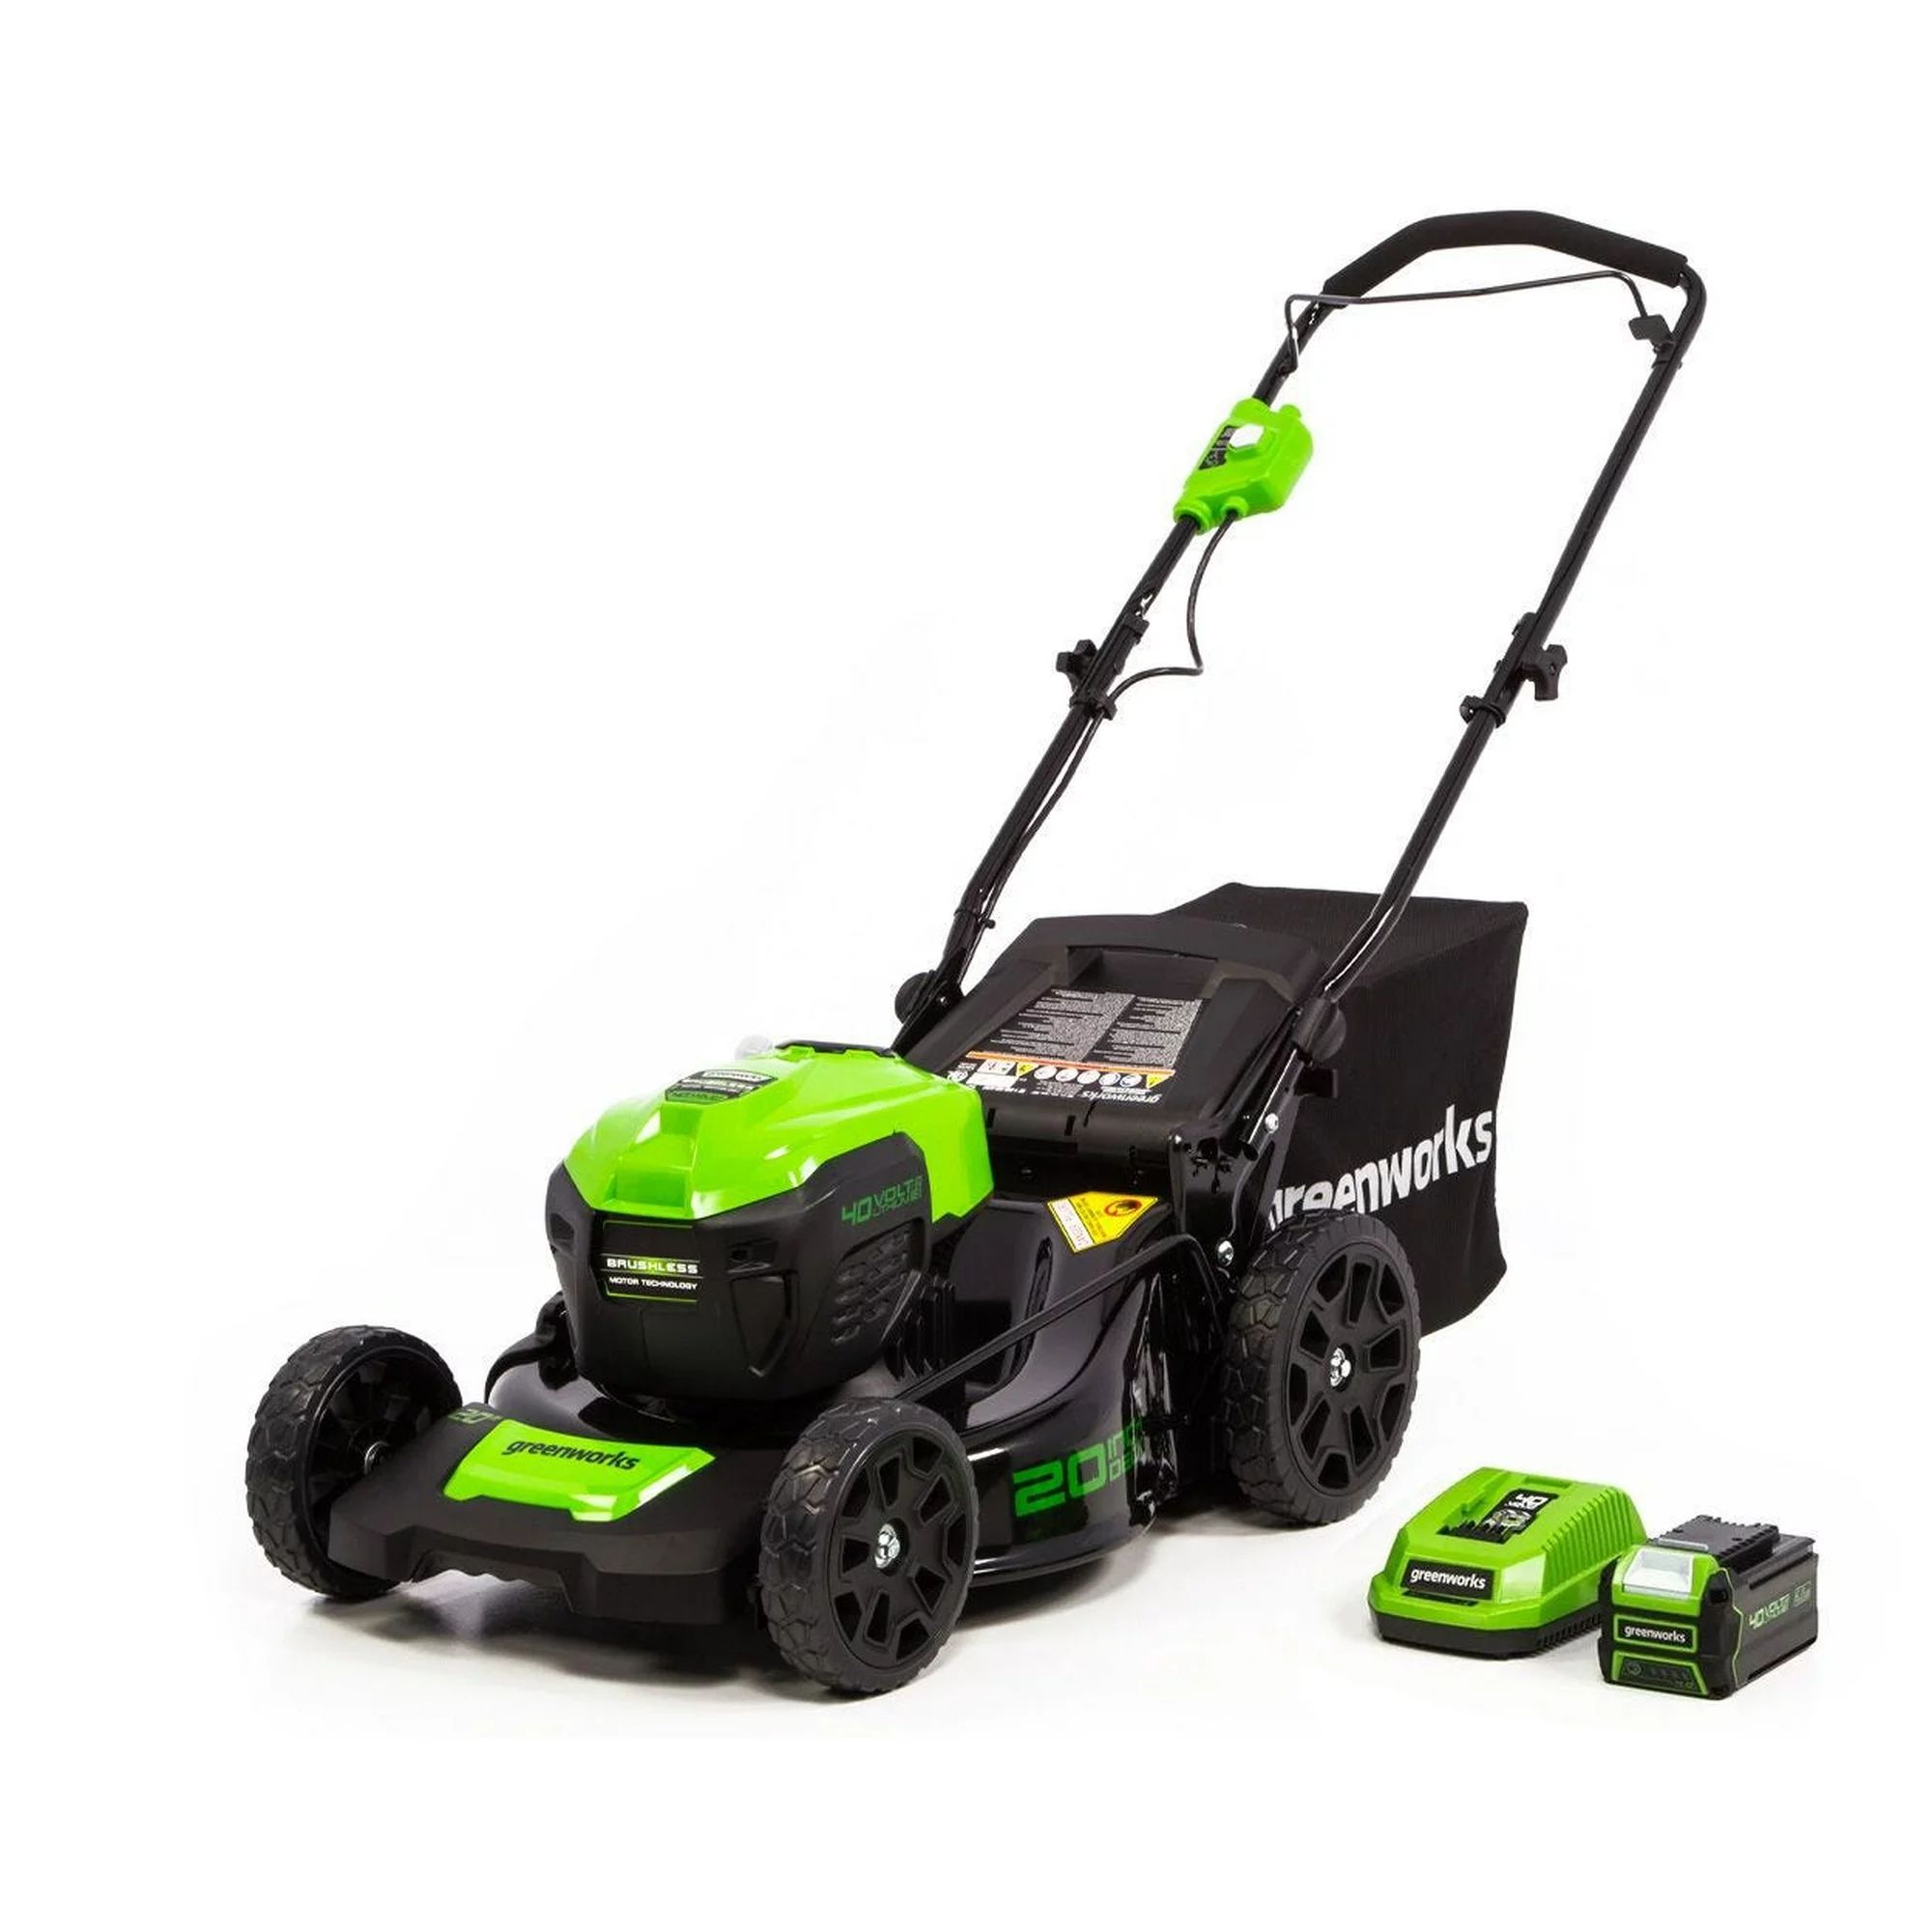 Greenworks 40V 20" Brushless Push Lawn Mower with 4.0 Ah Battery & Quick Charger 2516302VT | Walmart (US)